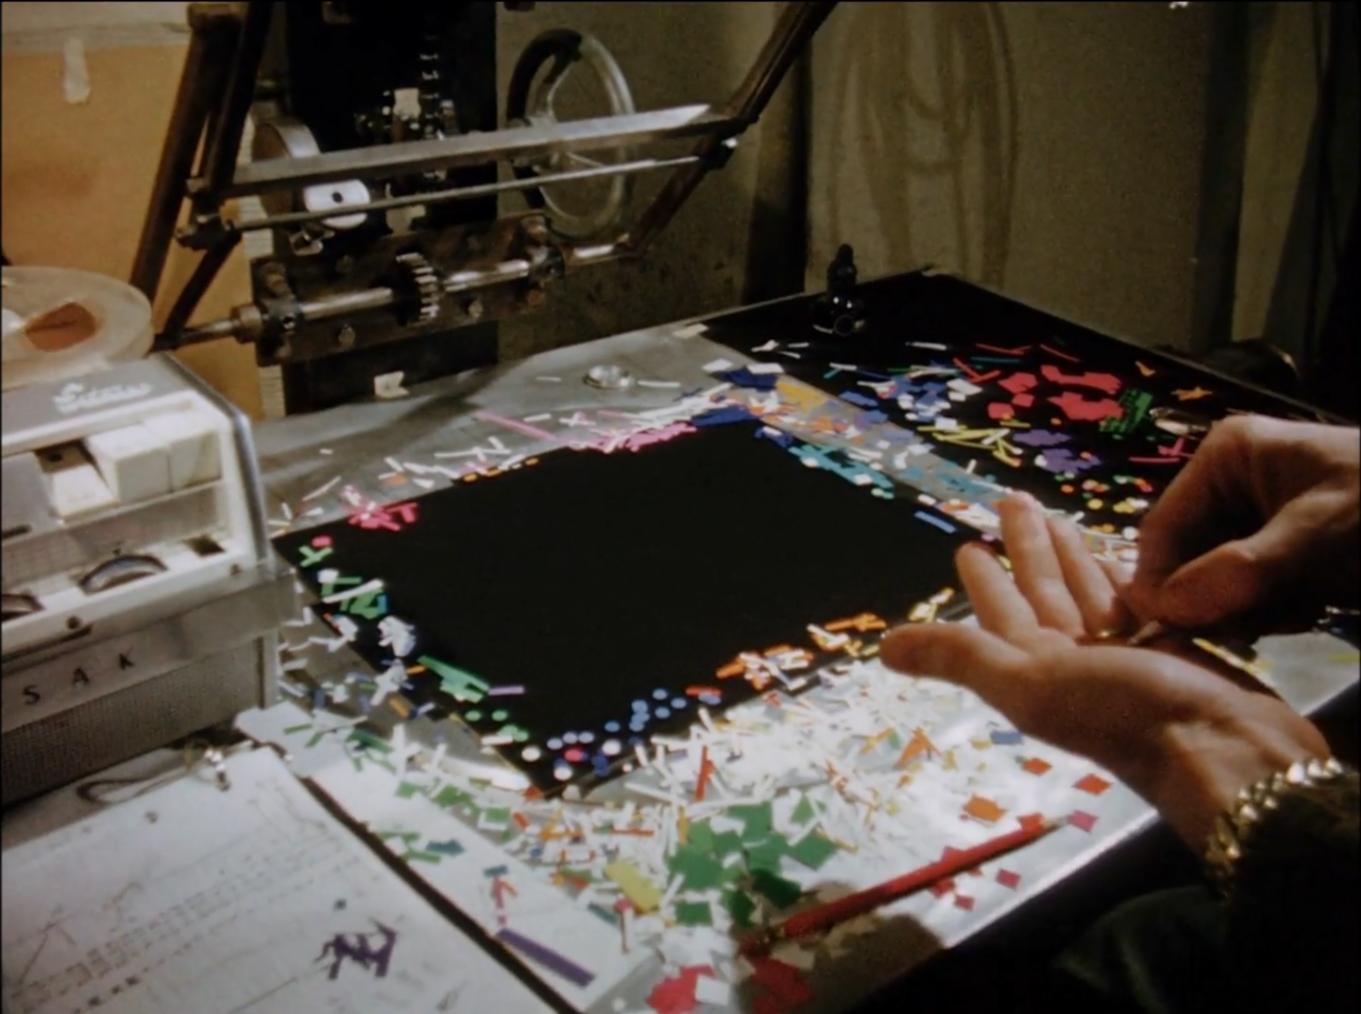 film still depicting a worktable used for stop-motion animation with scraps of paper strewn across and a man's hands delicately places the pieces